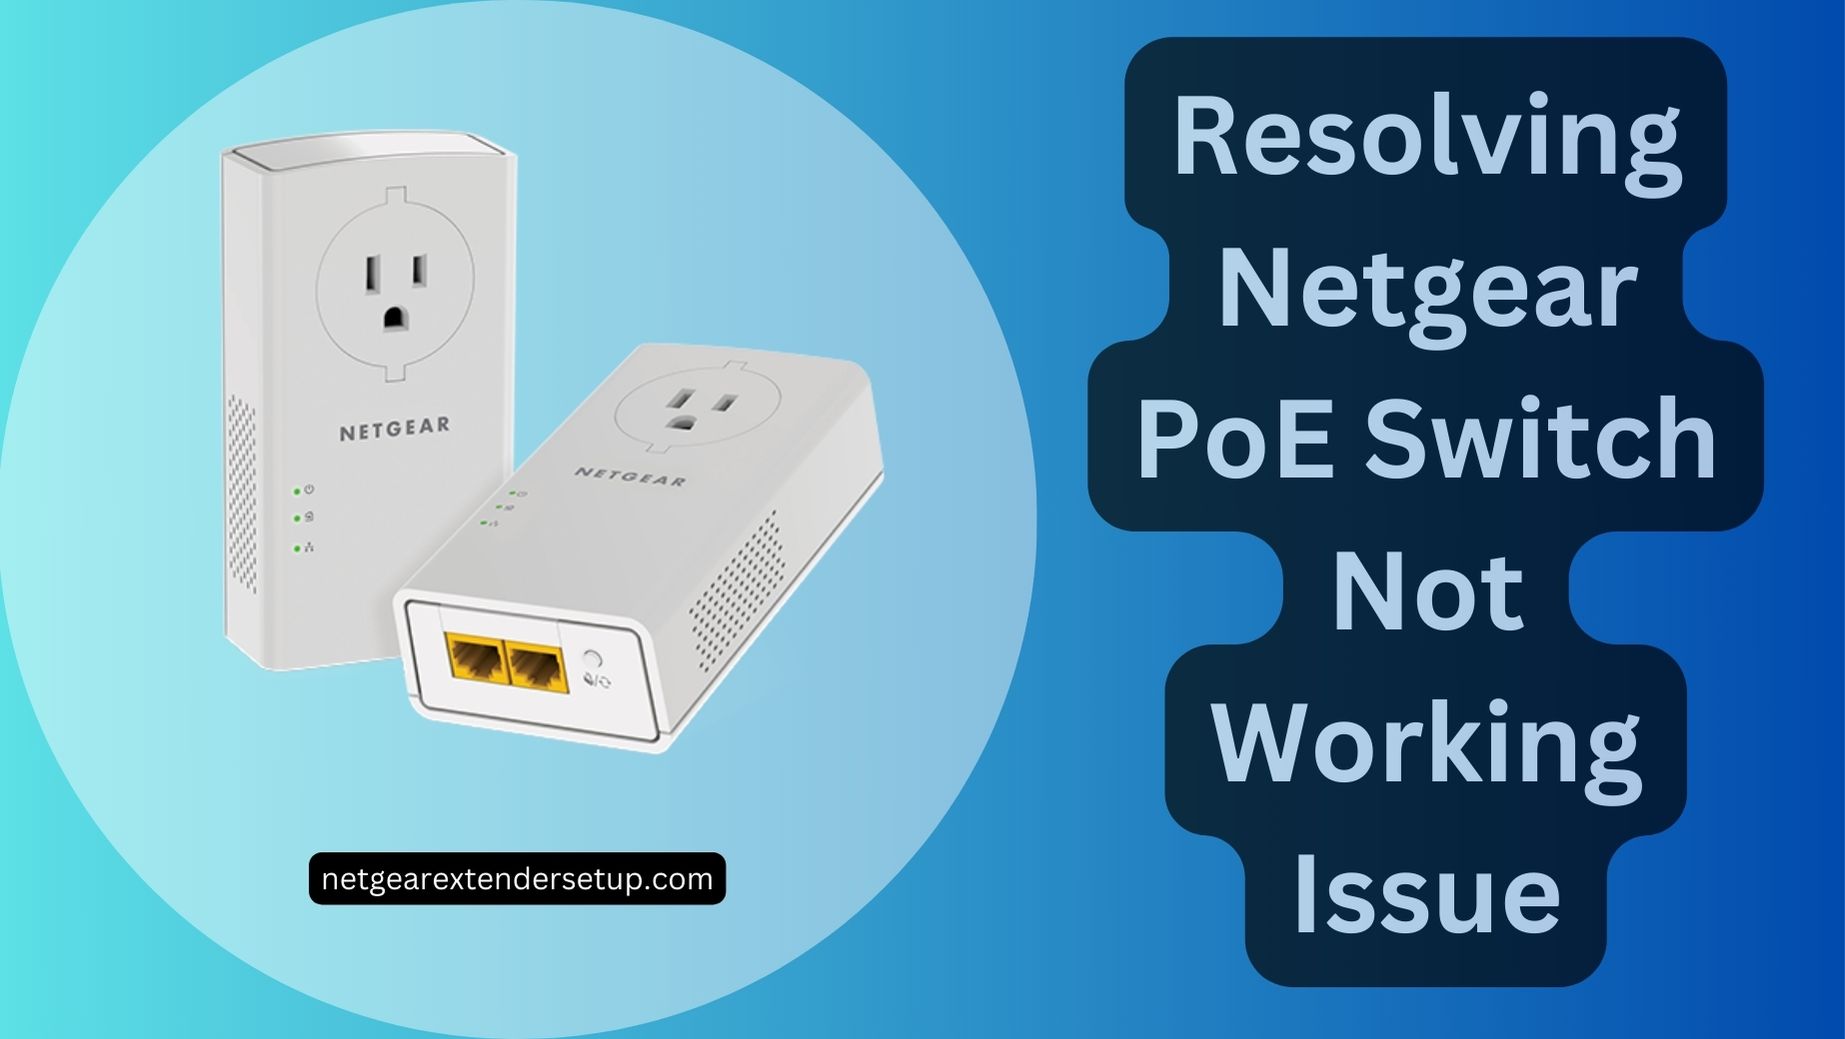 You are currently viewing Resolving Netgear PoE Switch Not Working Issue